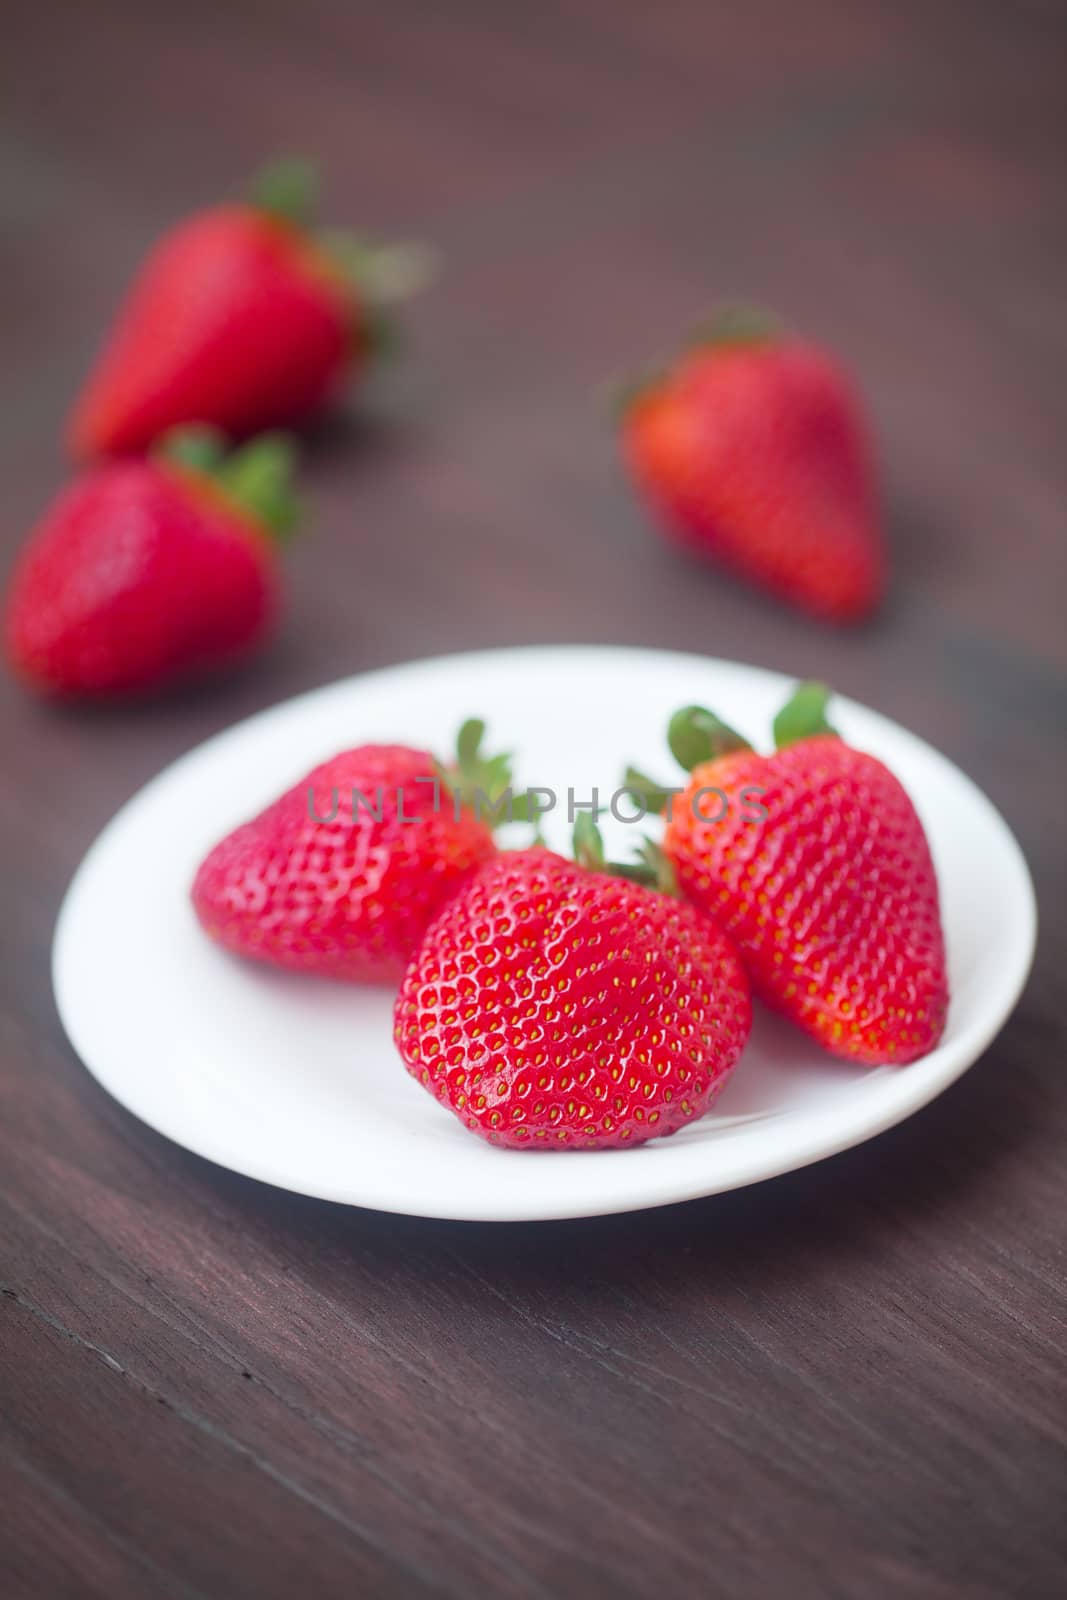 red juicy strawberry in a plate on a wooden surface by jannyjus